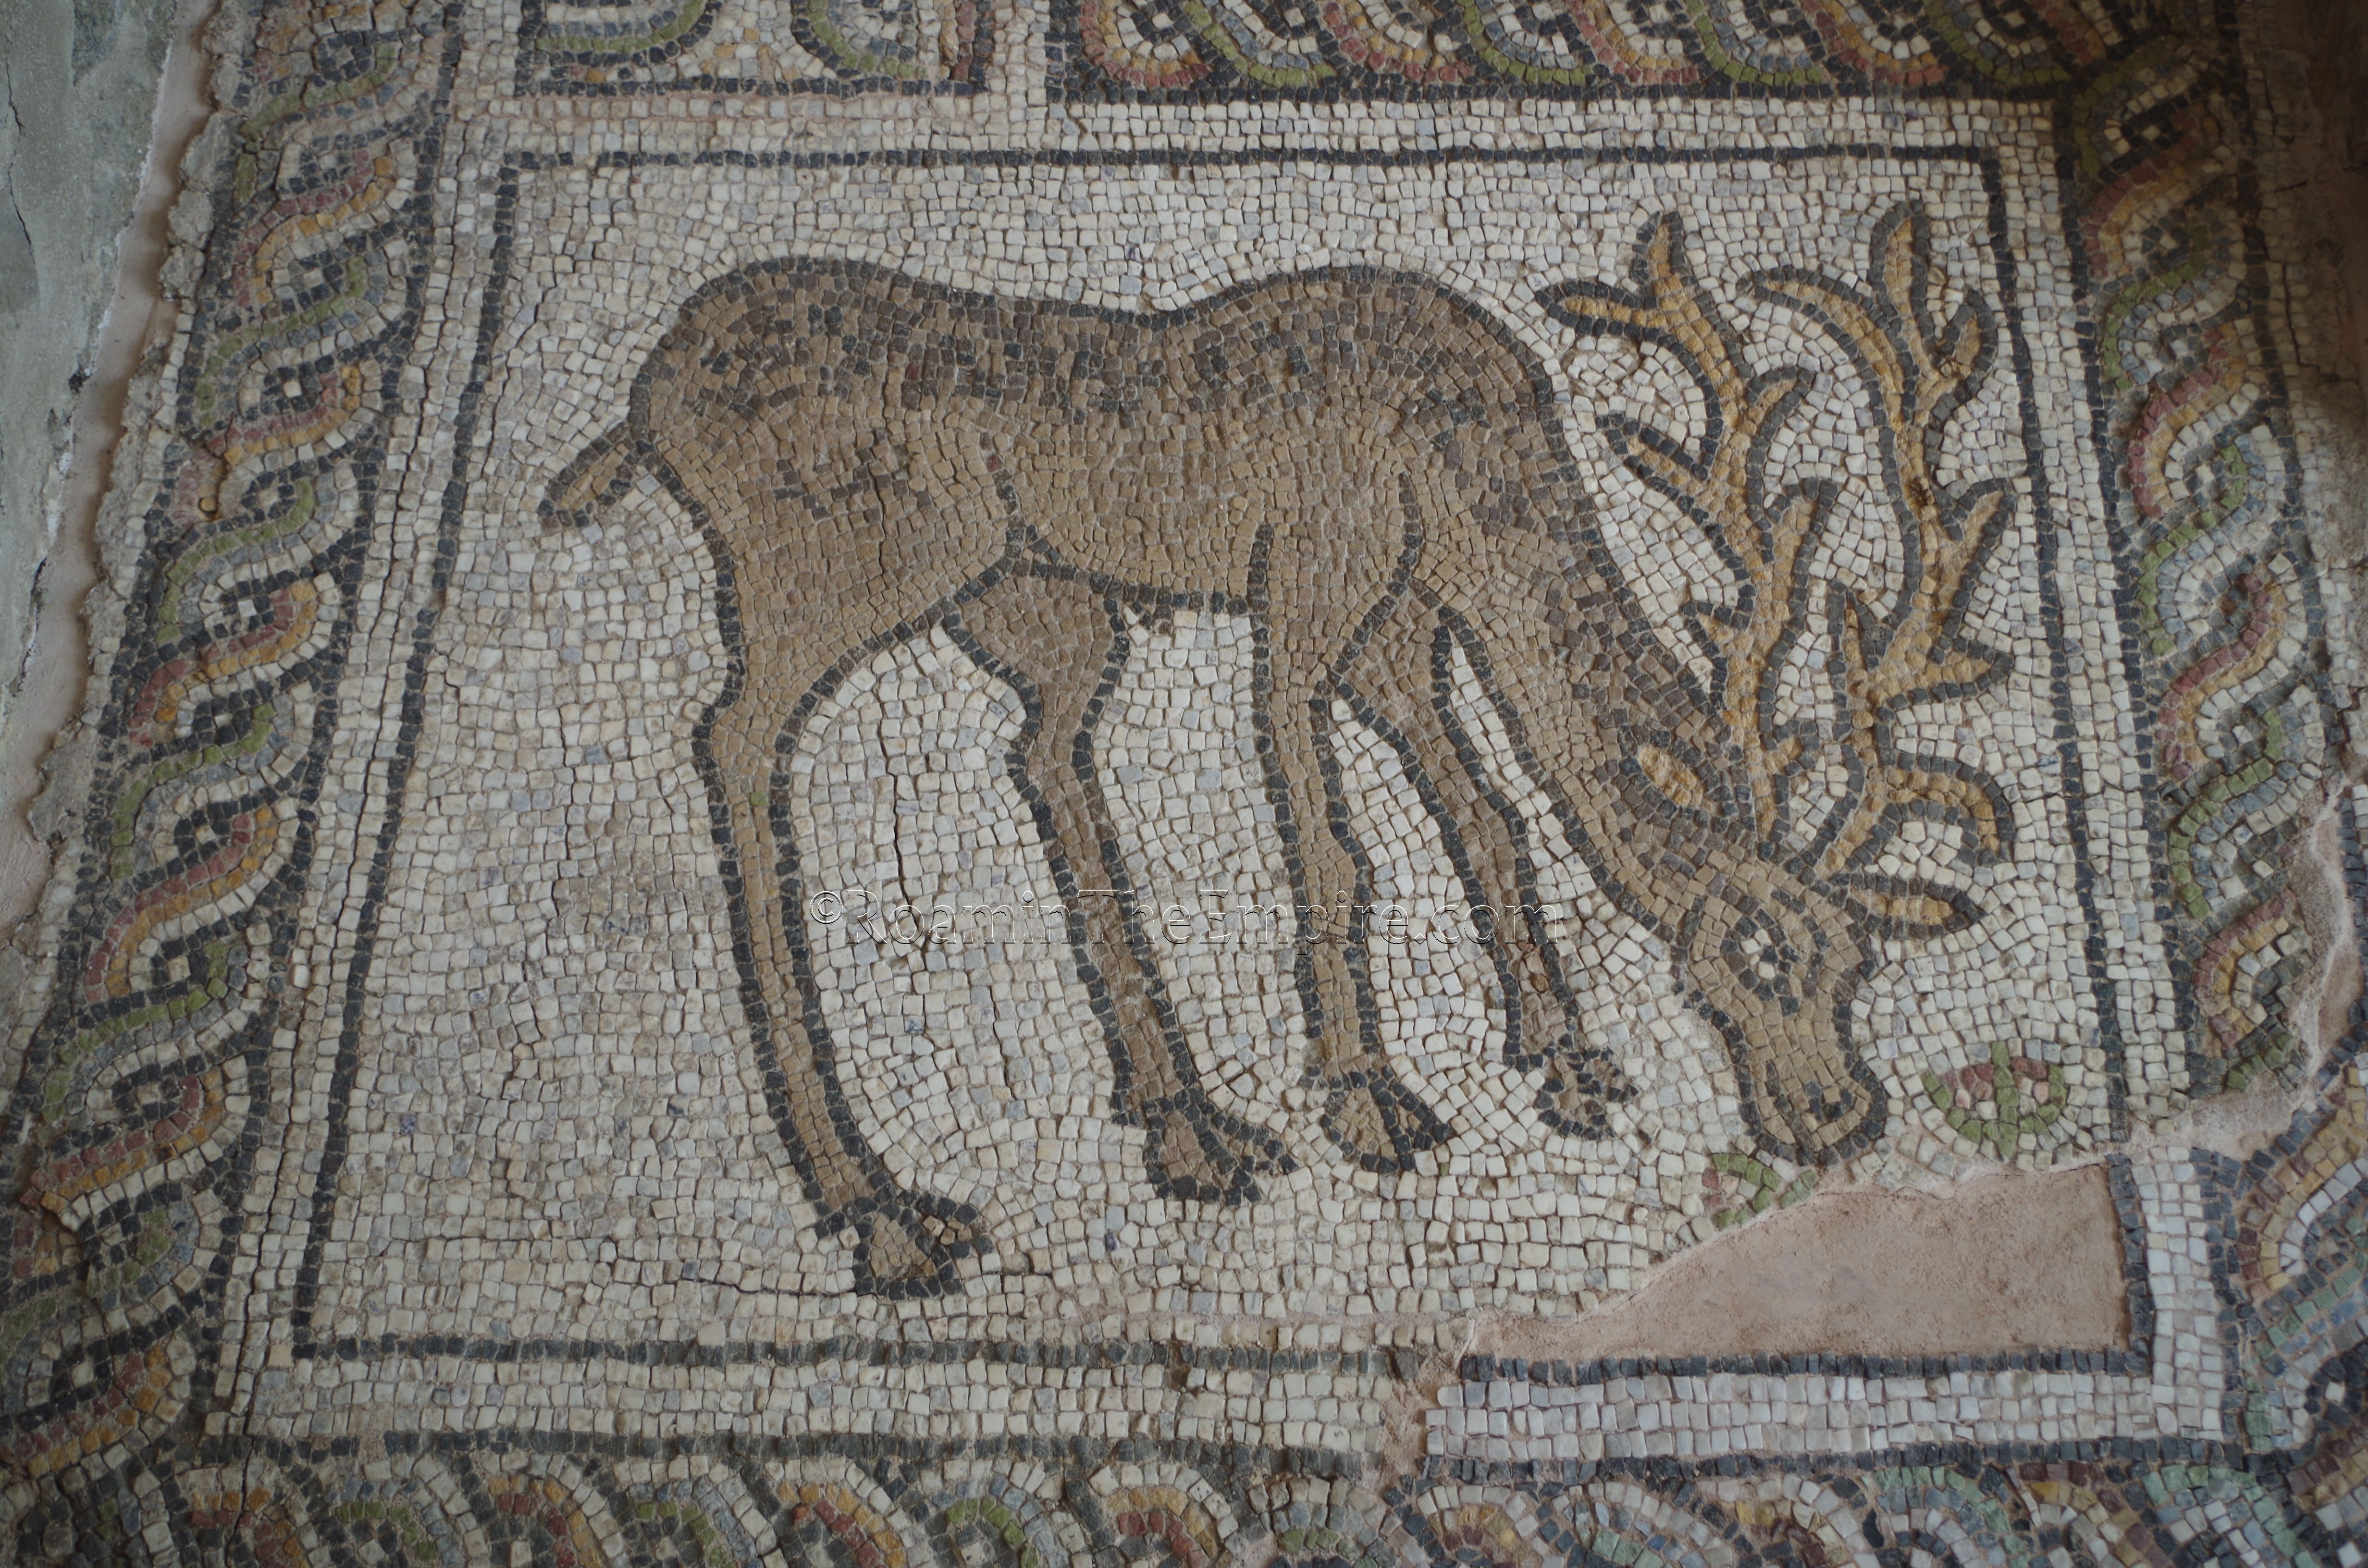 Stag mosaic in the Small Basilica.